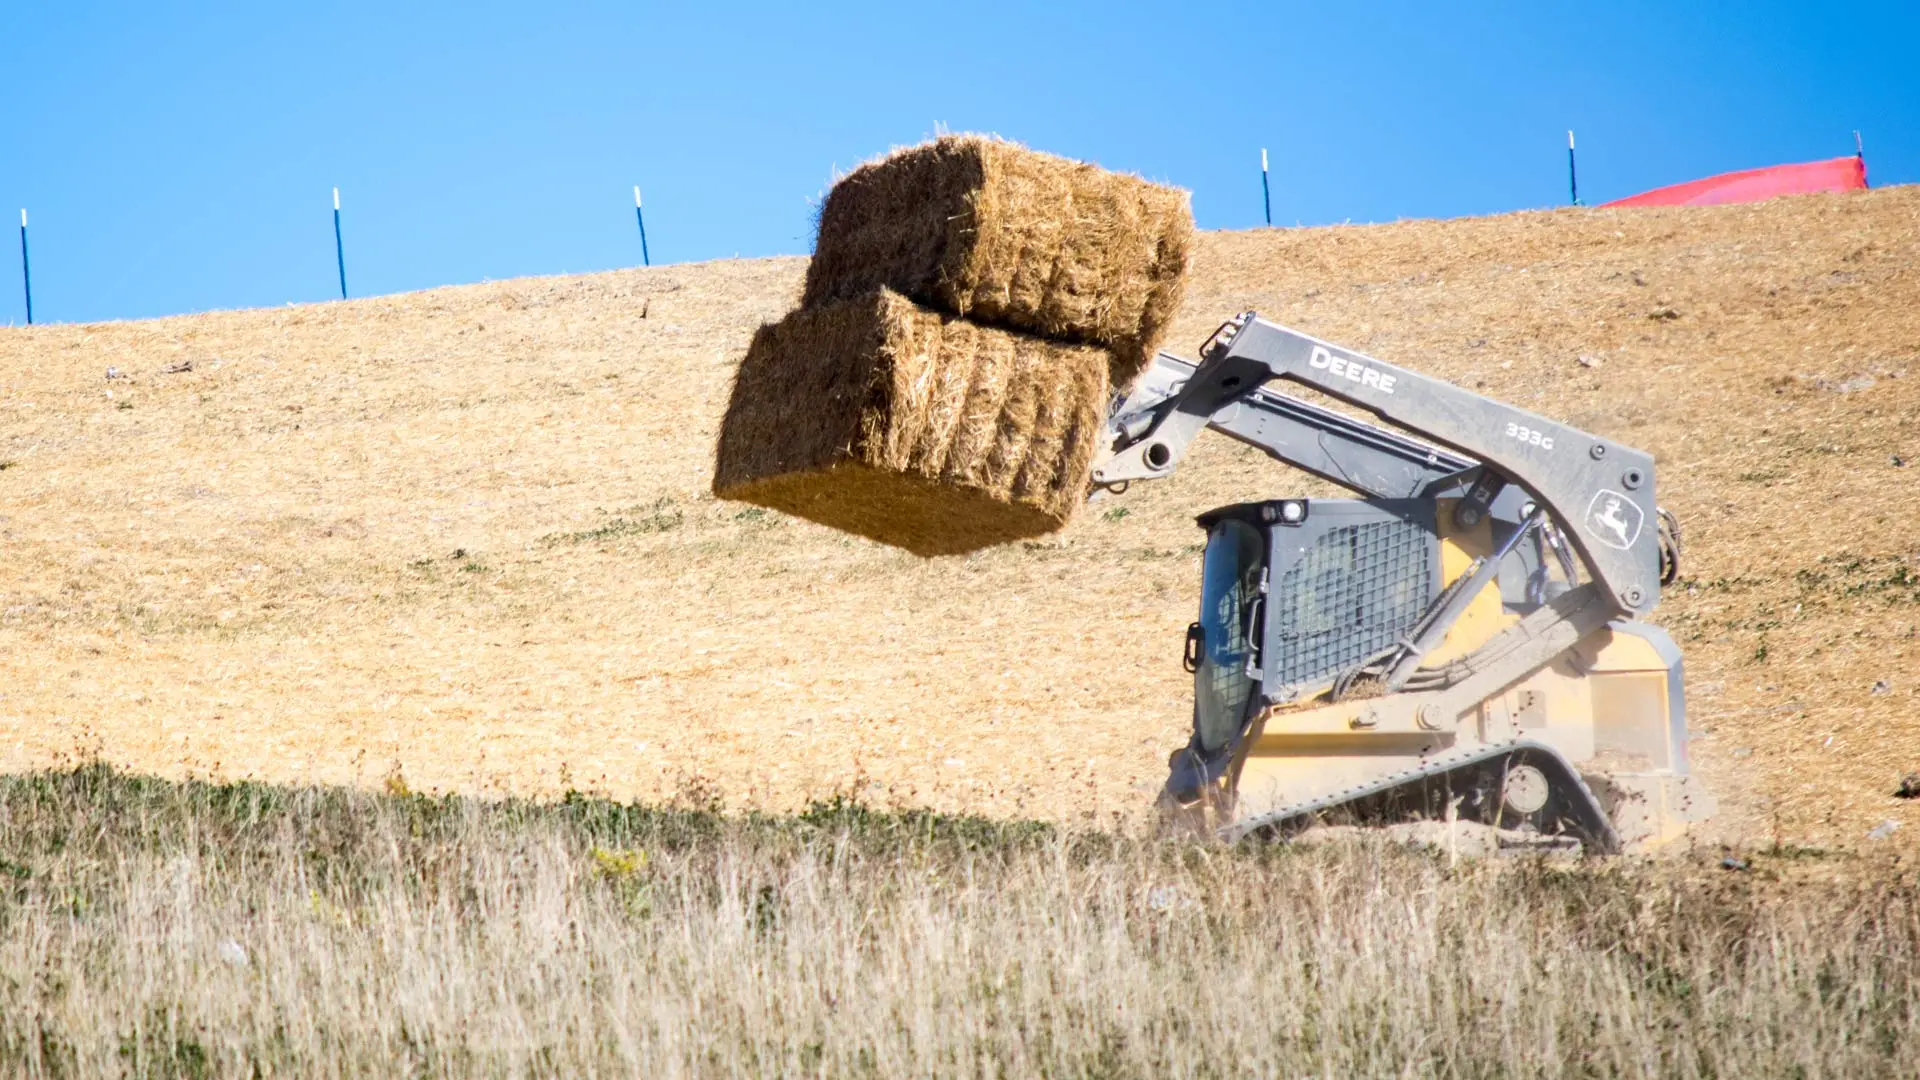 Straw being hauled by machinery in a field in Indiana.